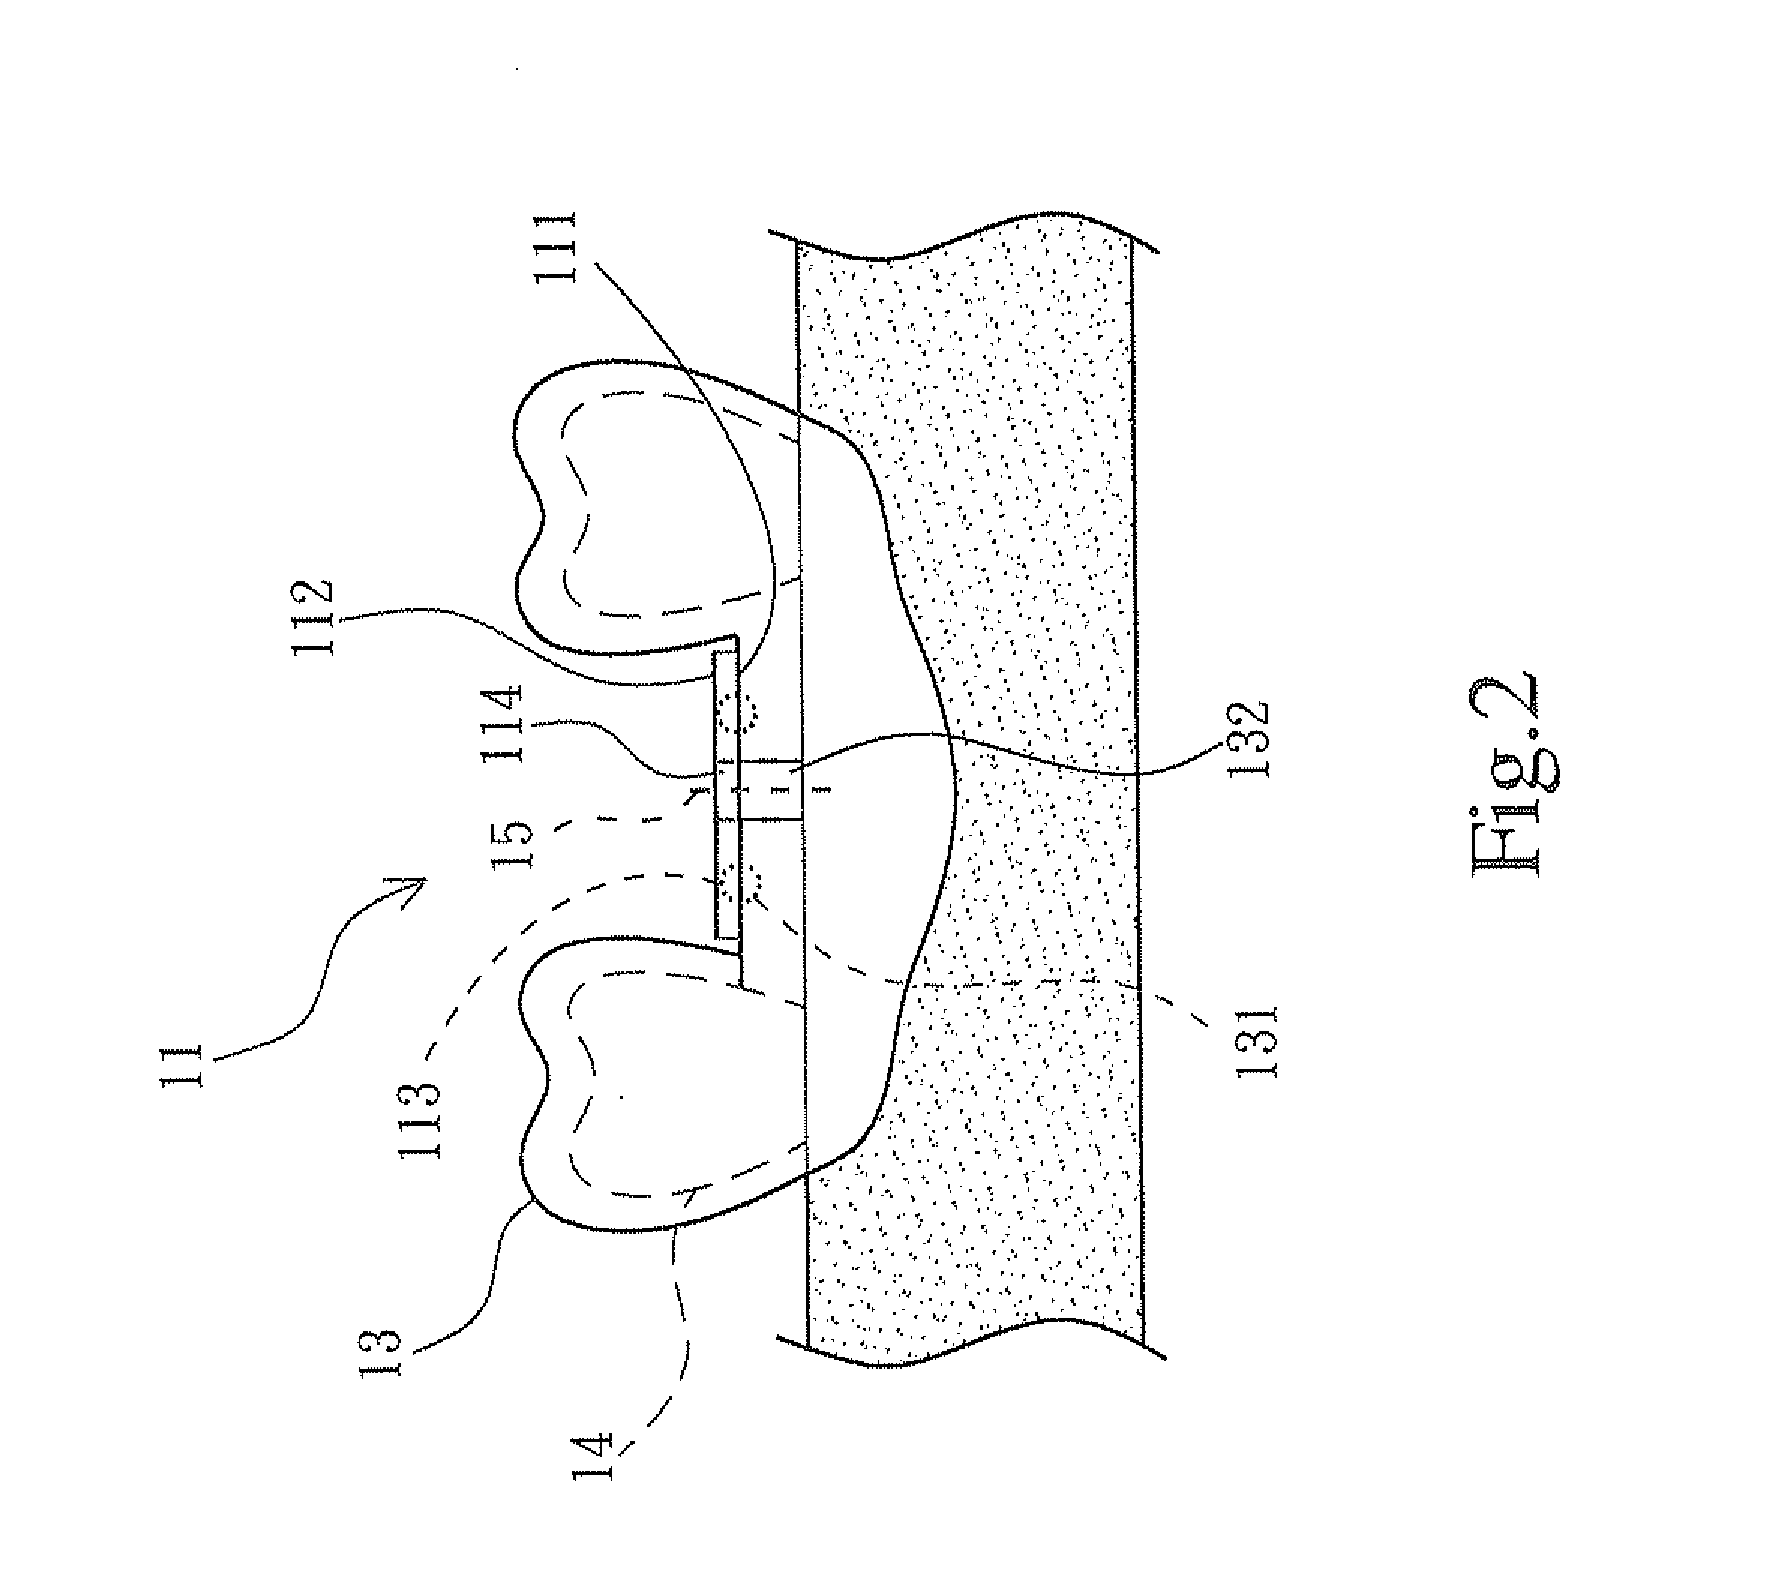 Method of manufacturing surgical template positioning device